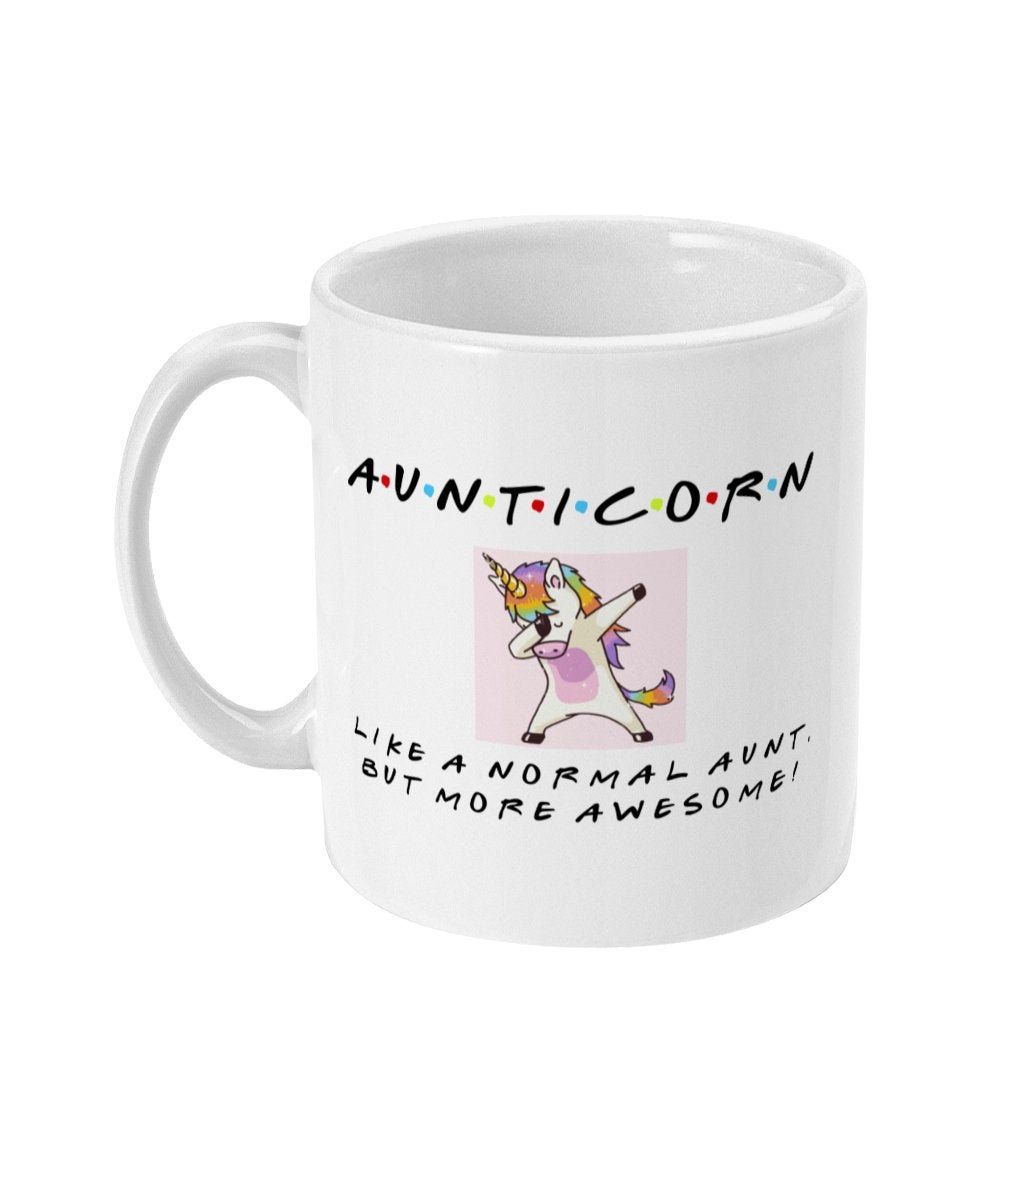 Aunt Gift Aunt Mug Unicorn Auntie Gifts Auntie Gift | Etsy -   diy Presents for aunt